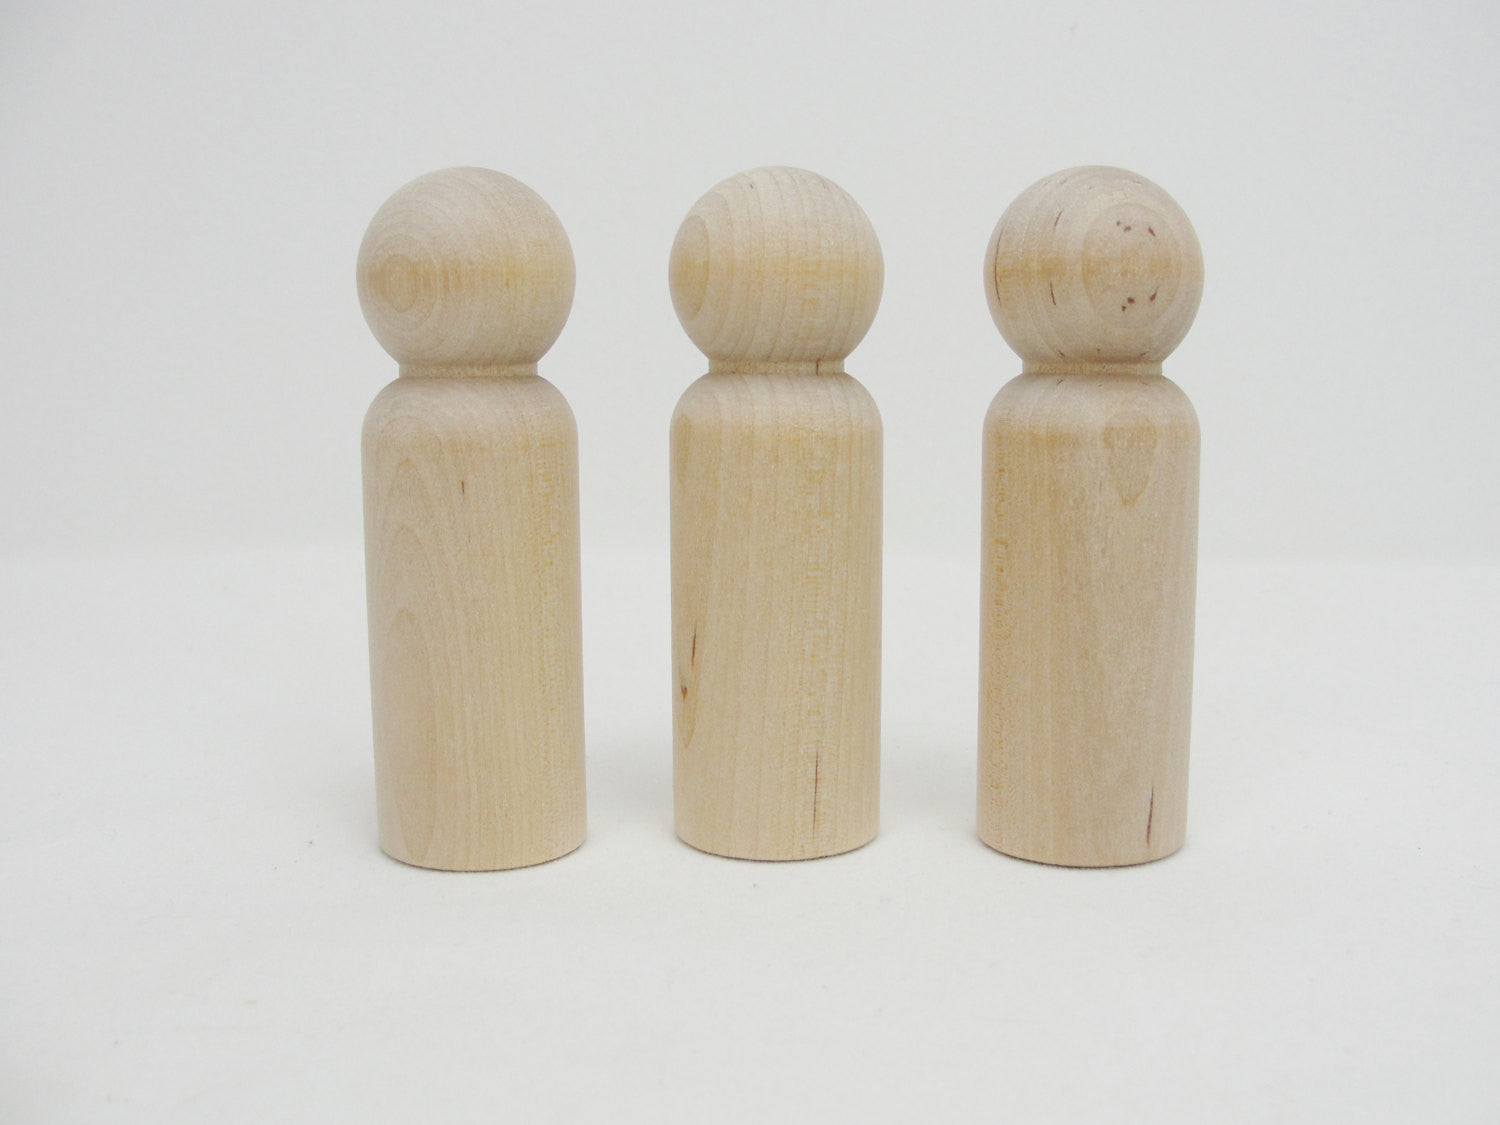 Large Wooden peg people man 3 1/2" tall - Wood parts - Craft Supply House